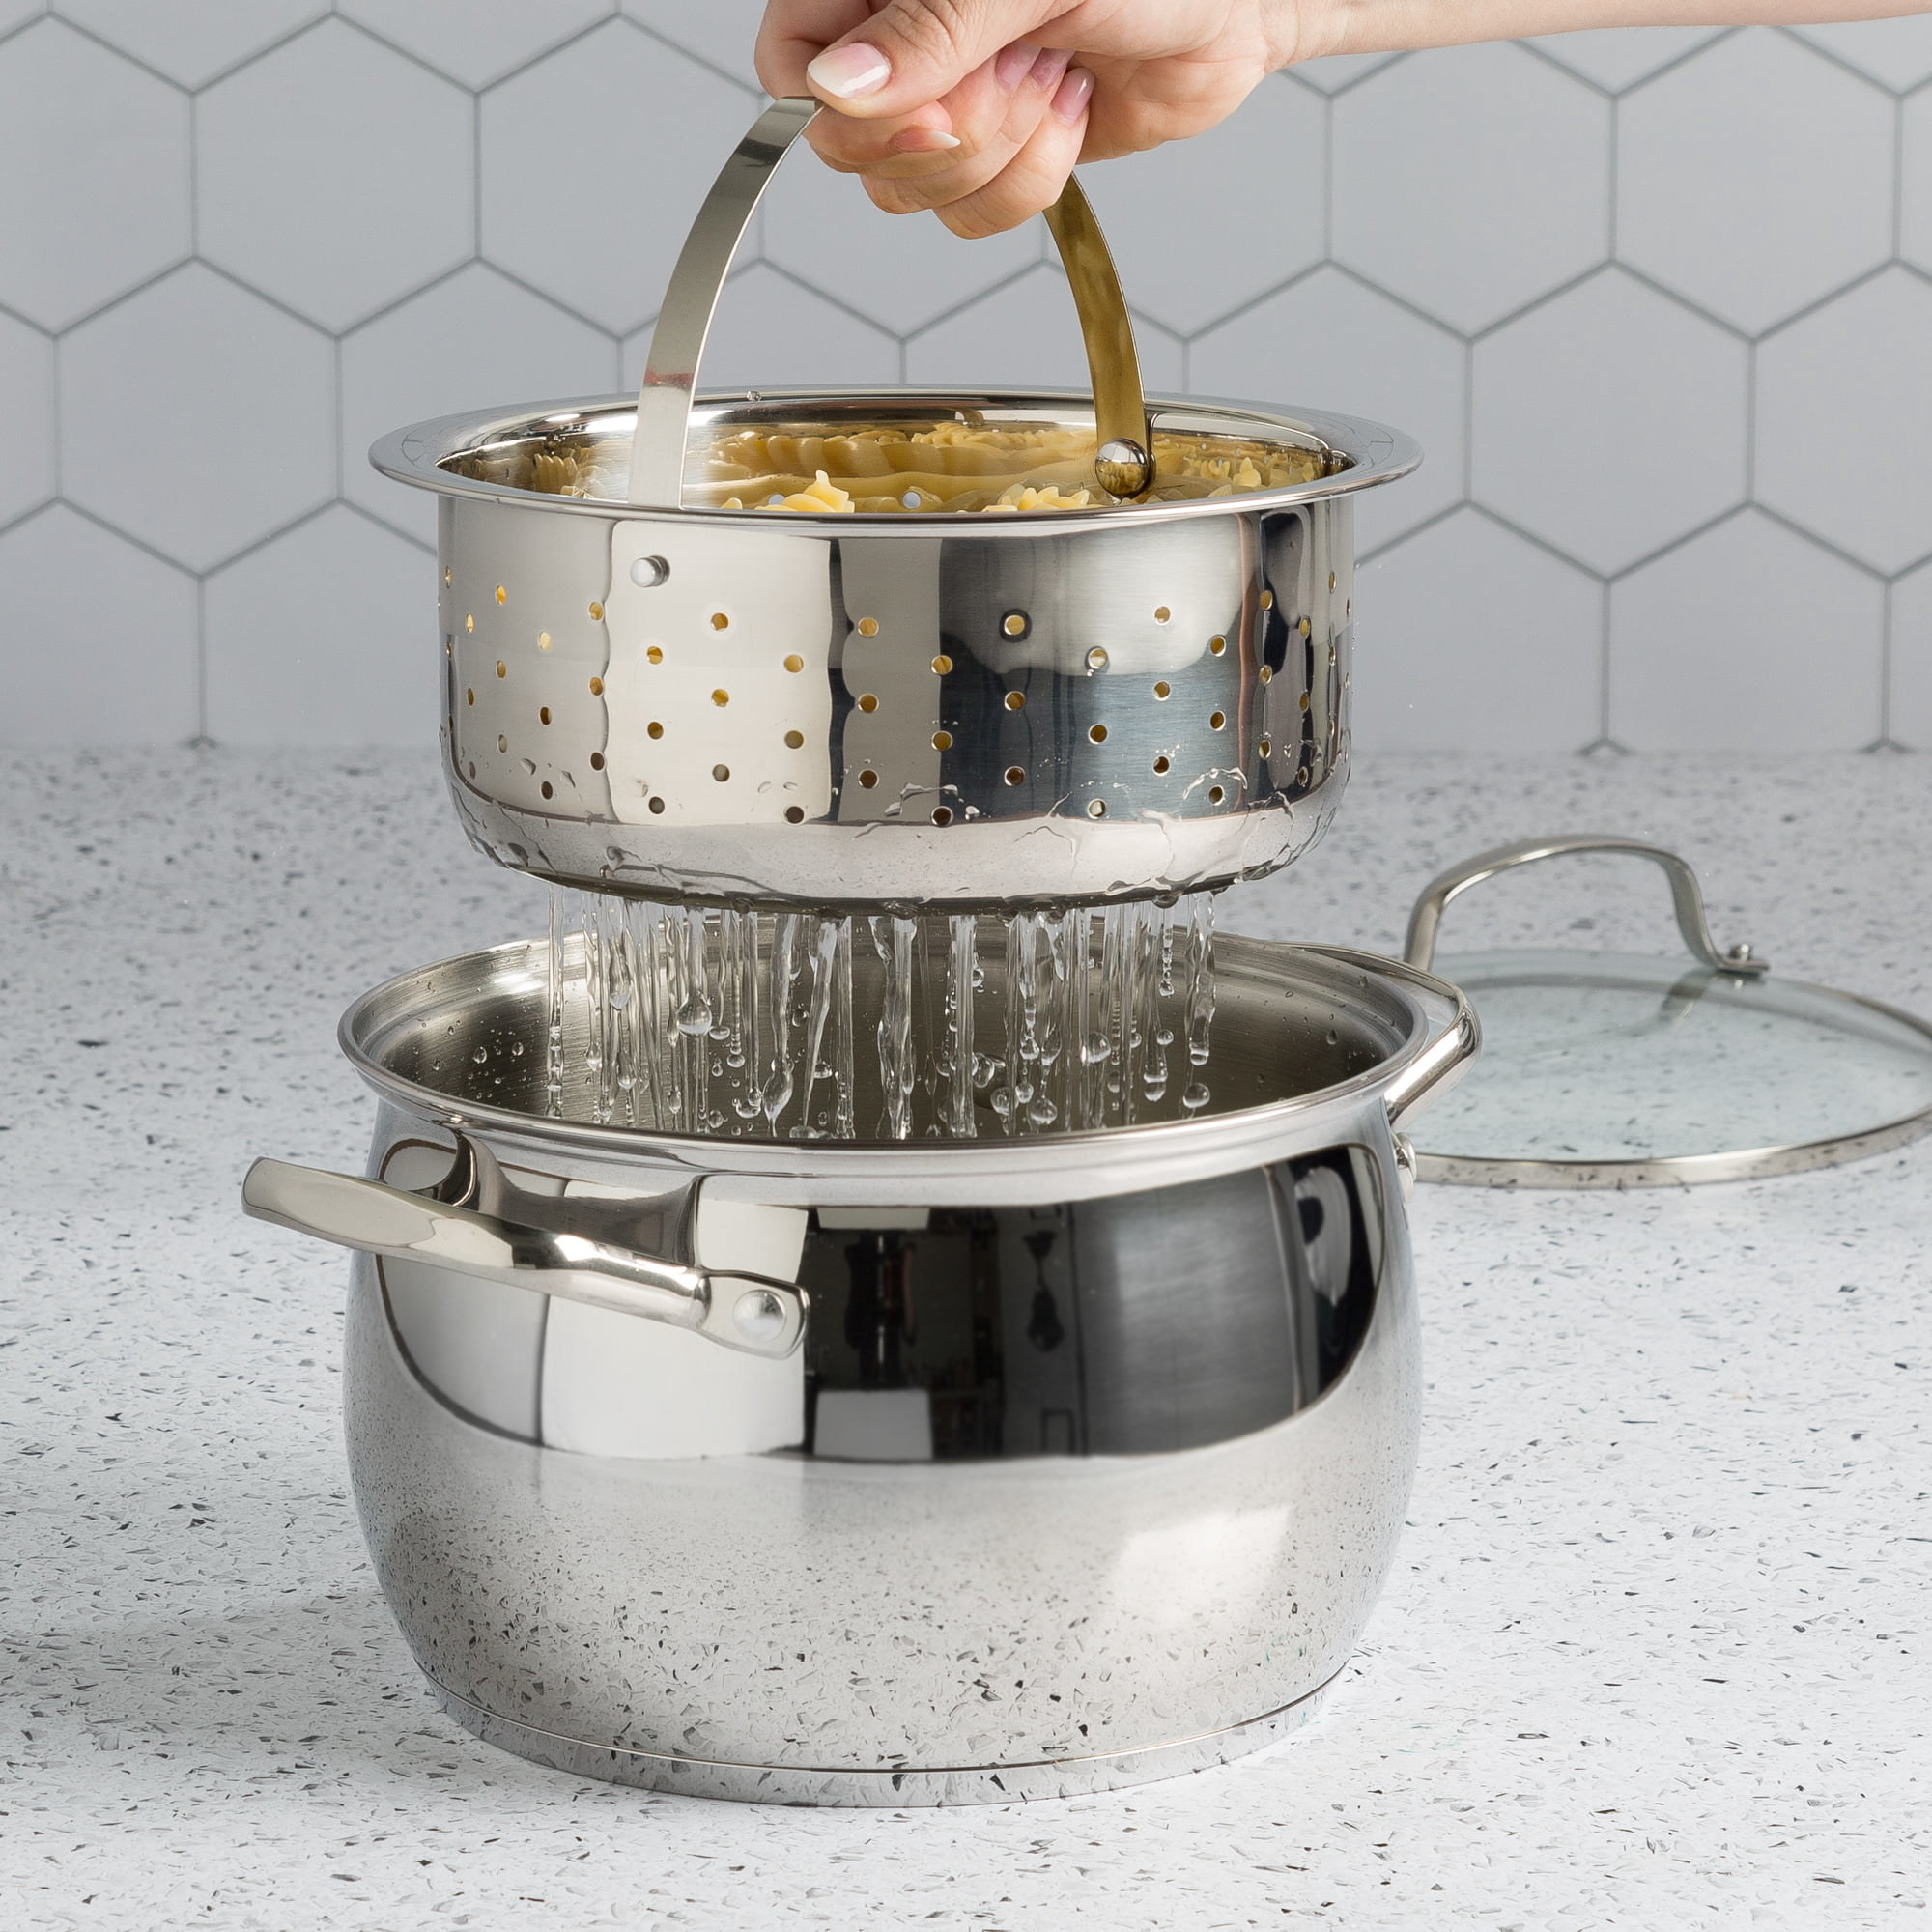 stainless steel pot draining pasta in its included colander and its lid on the counter